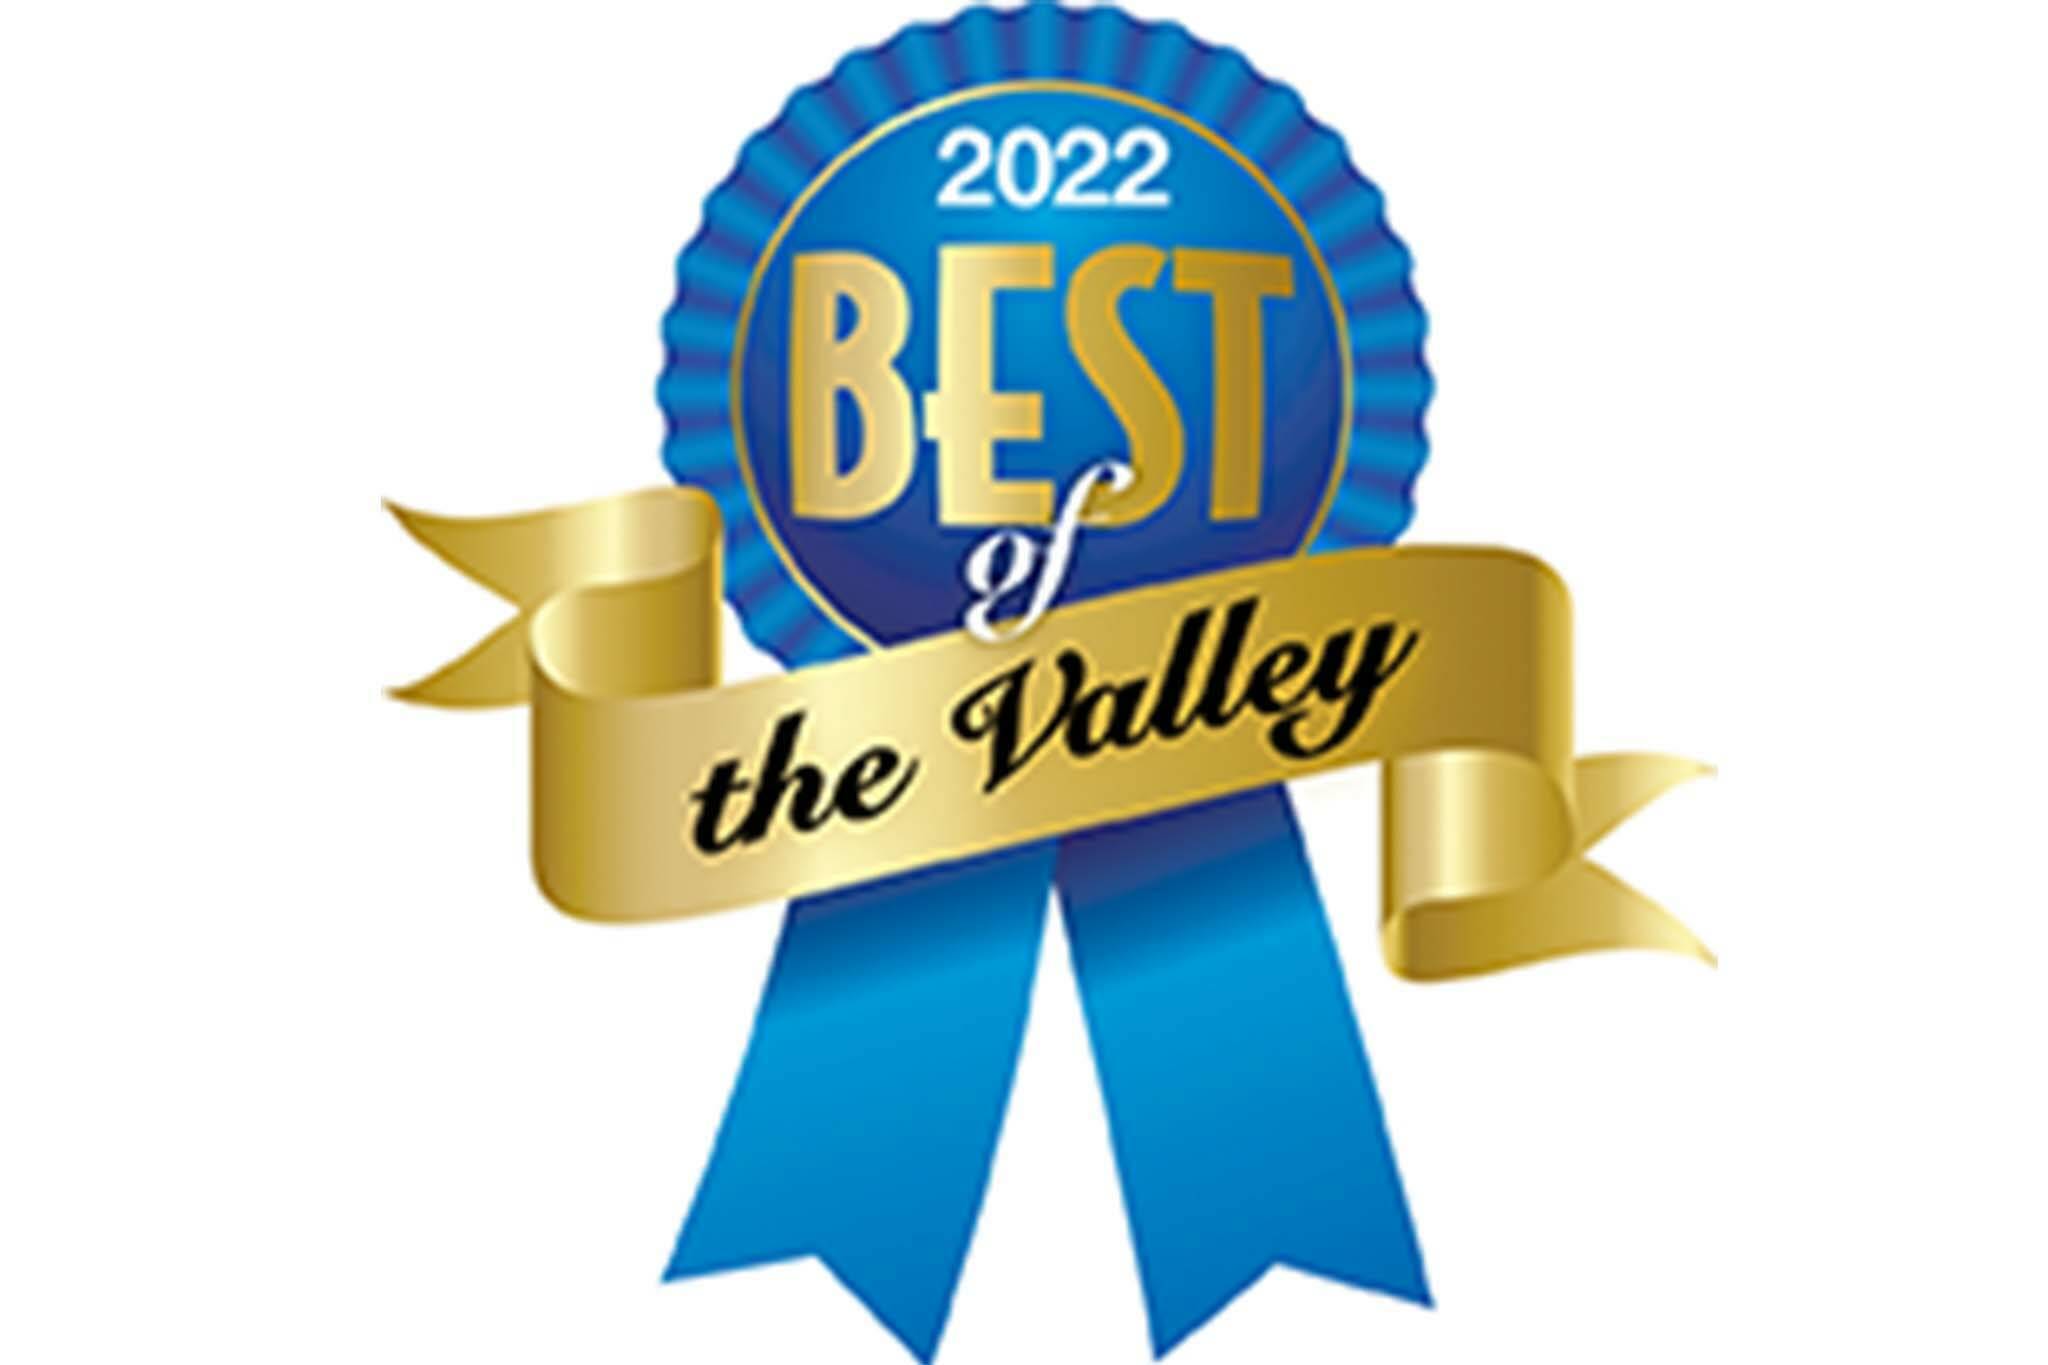 Best of the Valley logo.